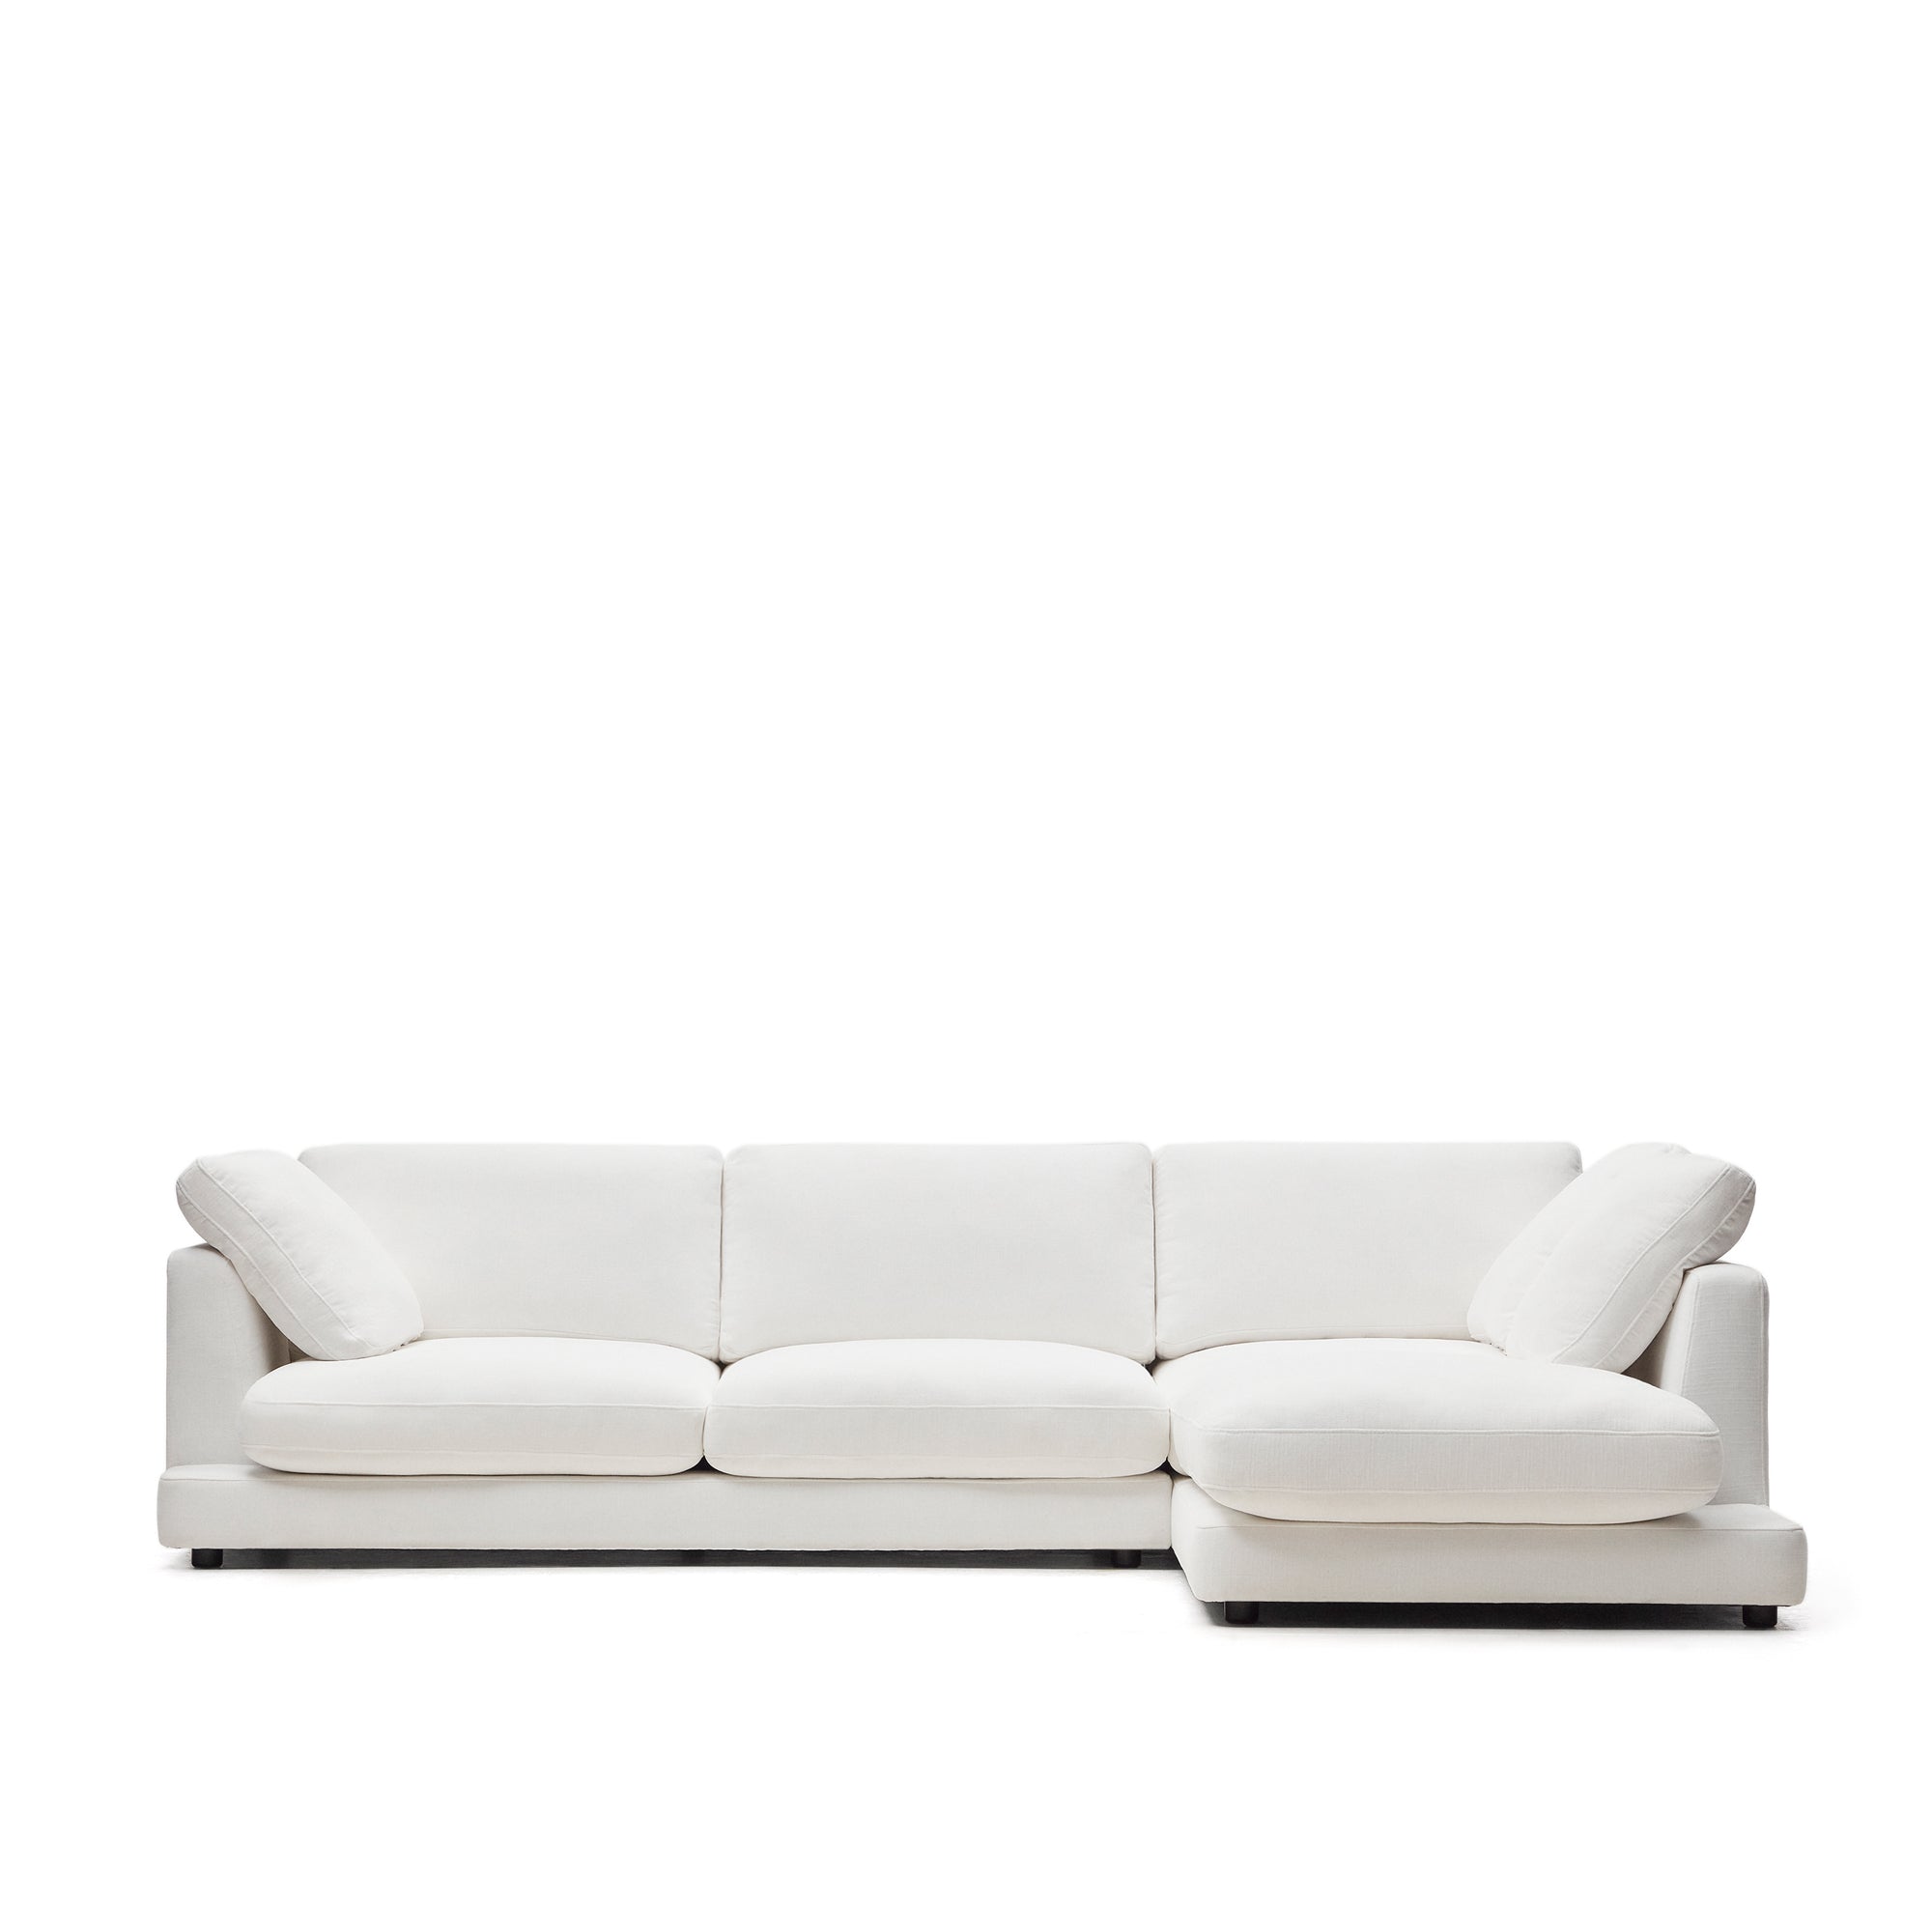 Gala 4 seater sofa with right side chaise longue in white, 300 cm